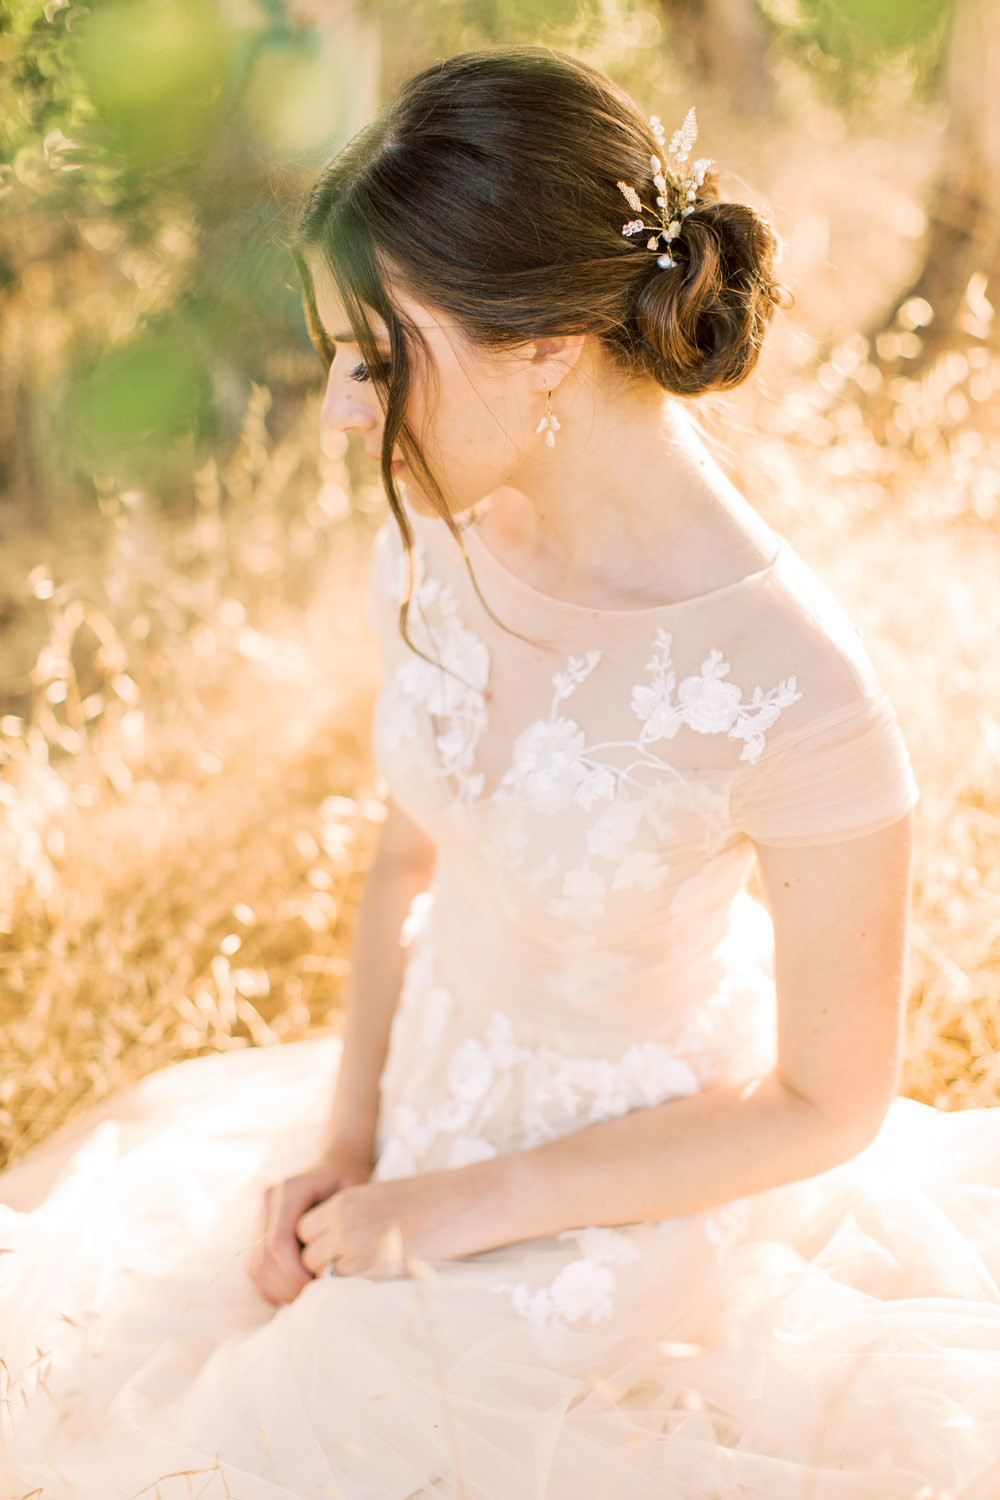 Pearl butterfly hair pin for a whimsical bride by Carrie Whelan Designs